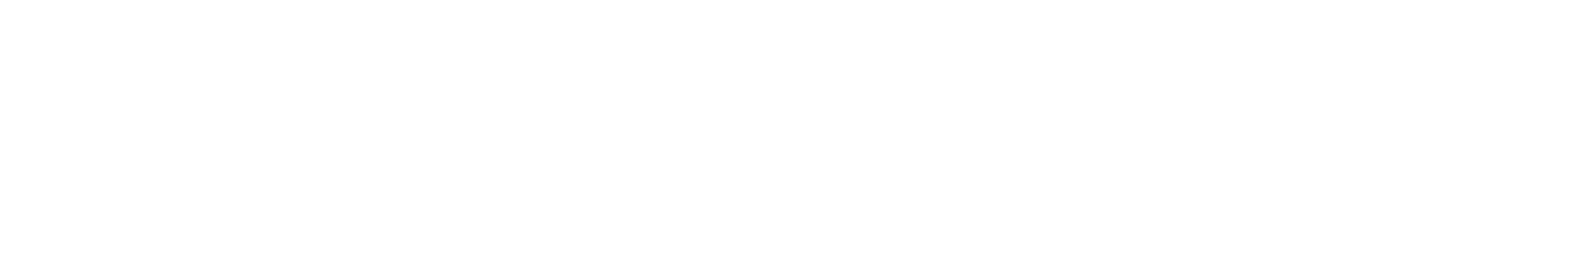 Community Health Systems
 logo large for dark backgrounds (transparent PNG)